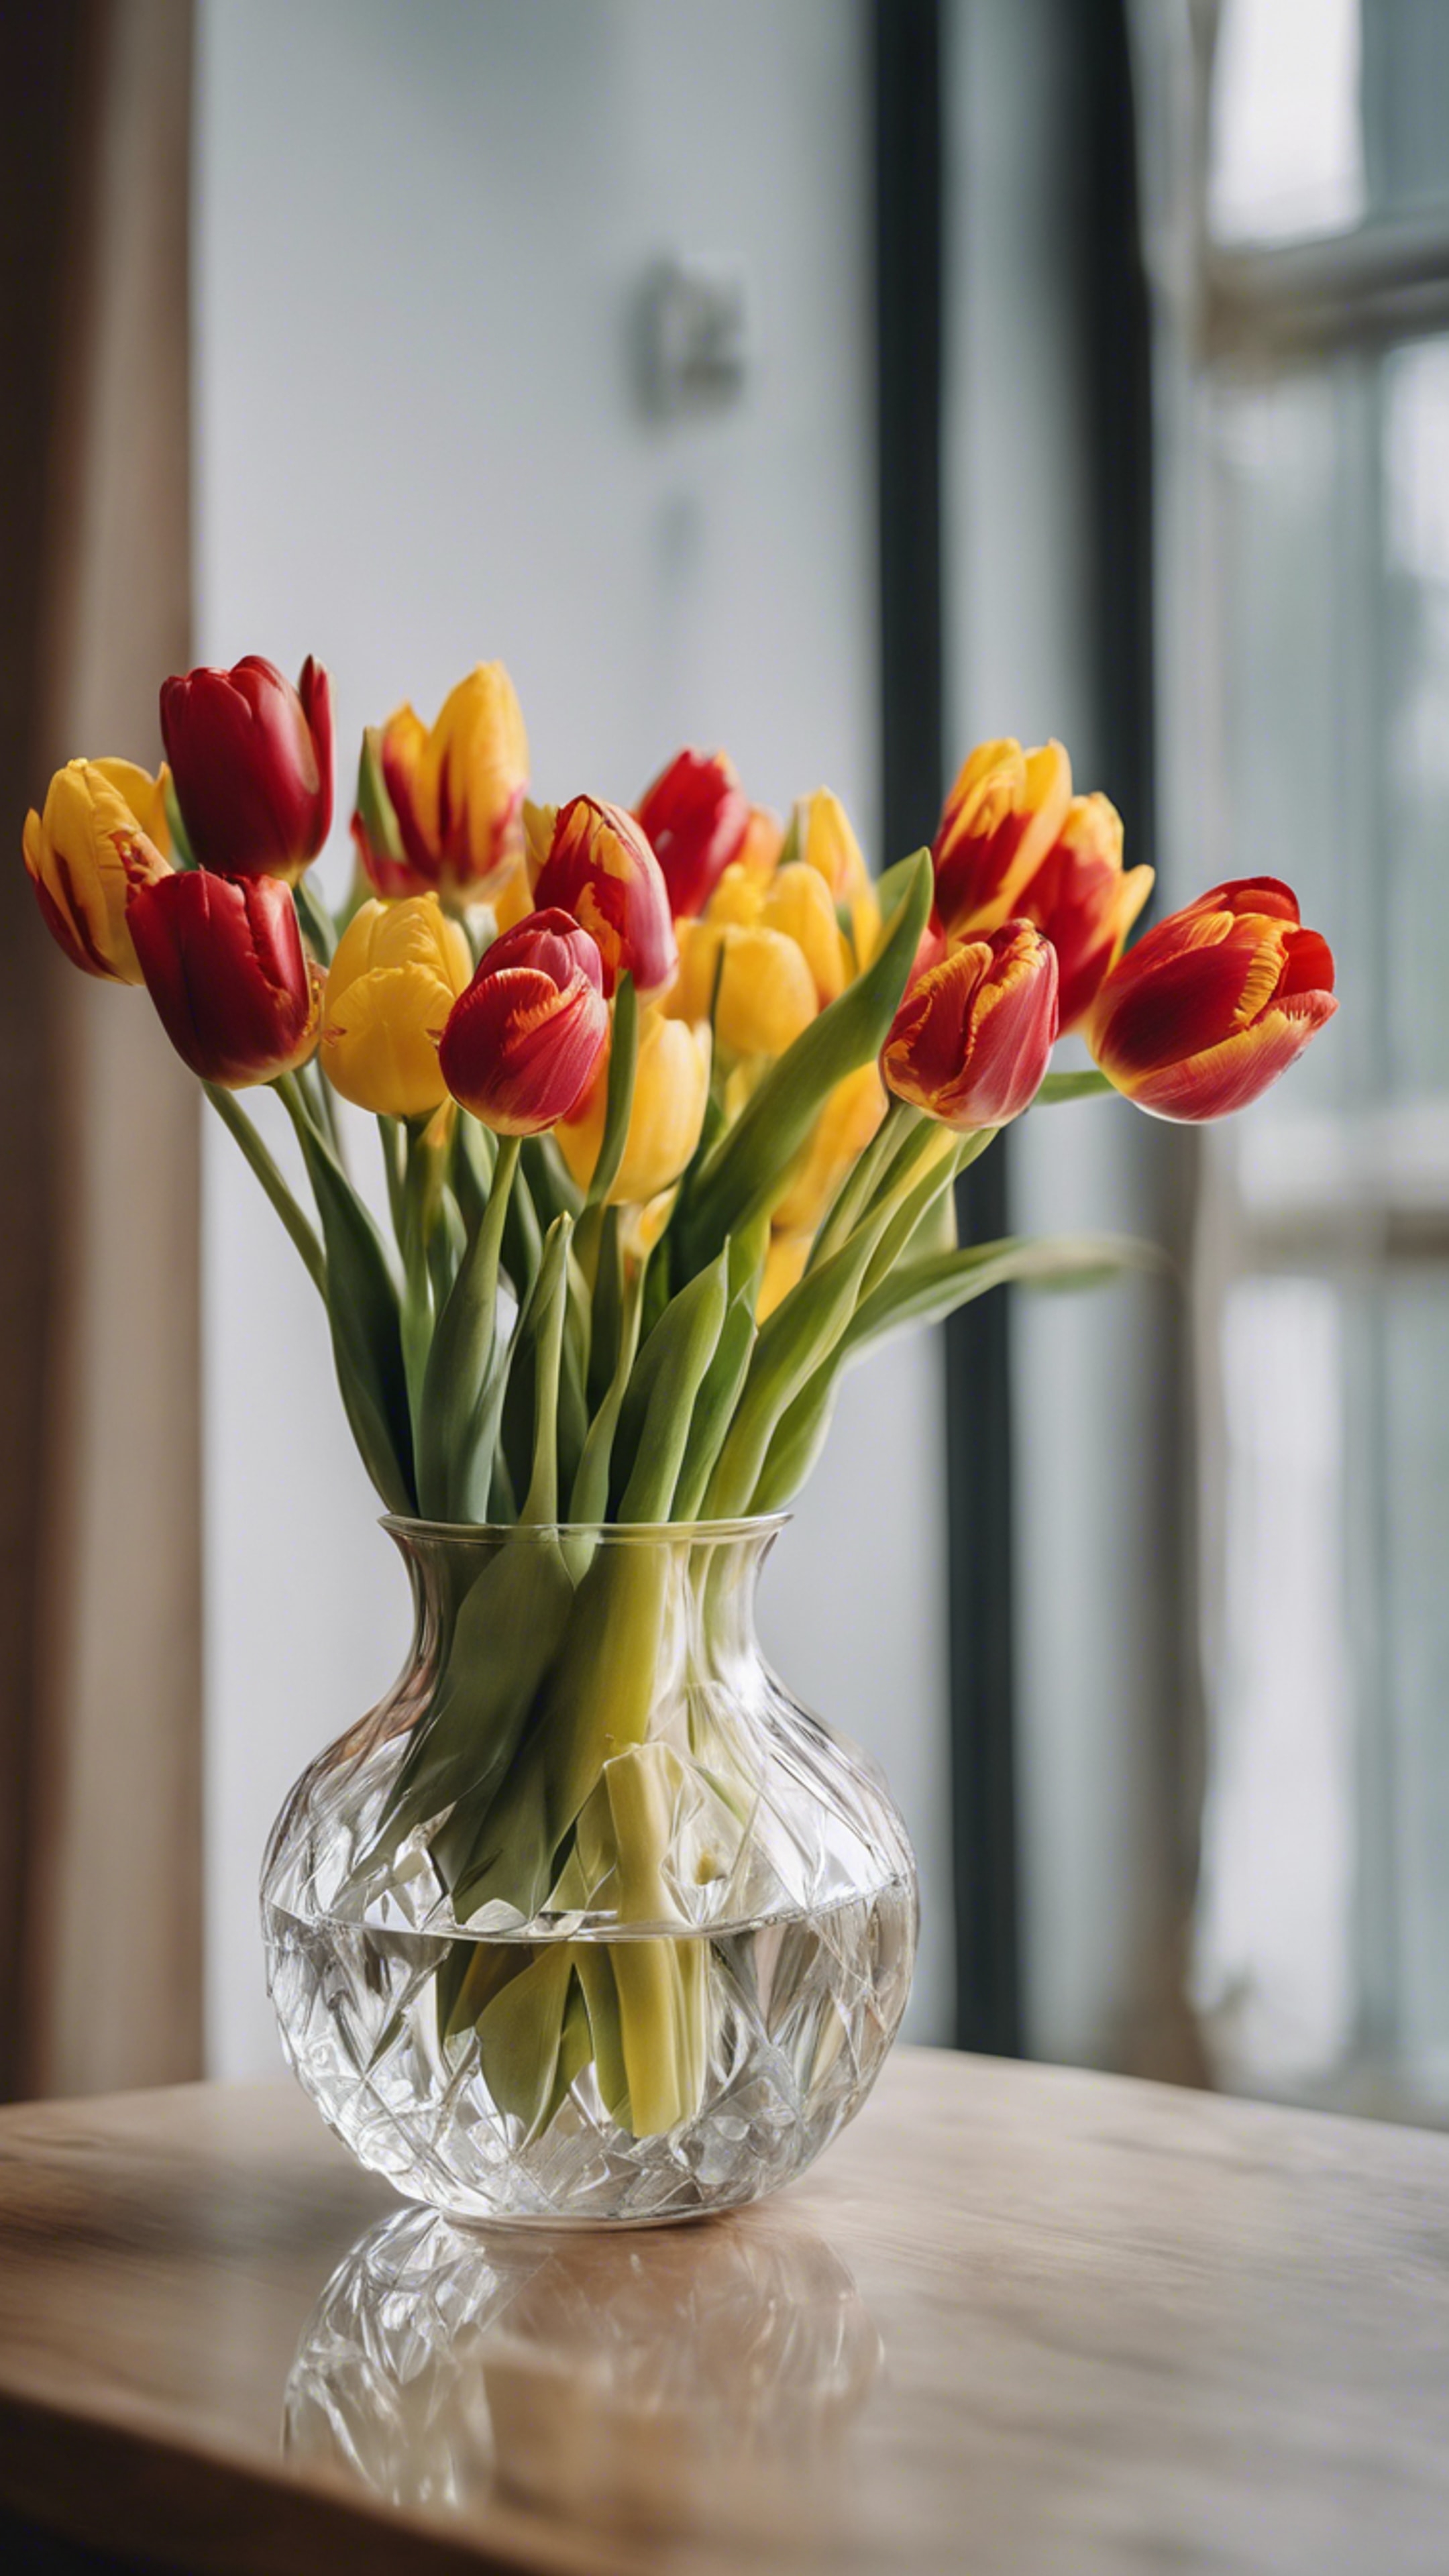 A bunch of fresh red and yellow tulips resting in a crystal clear vase. Papel de parede[770eab0b3cc545c1af9b]